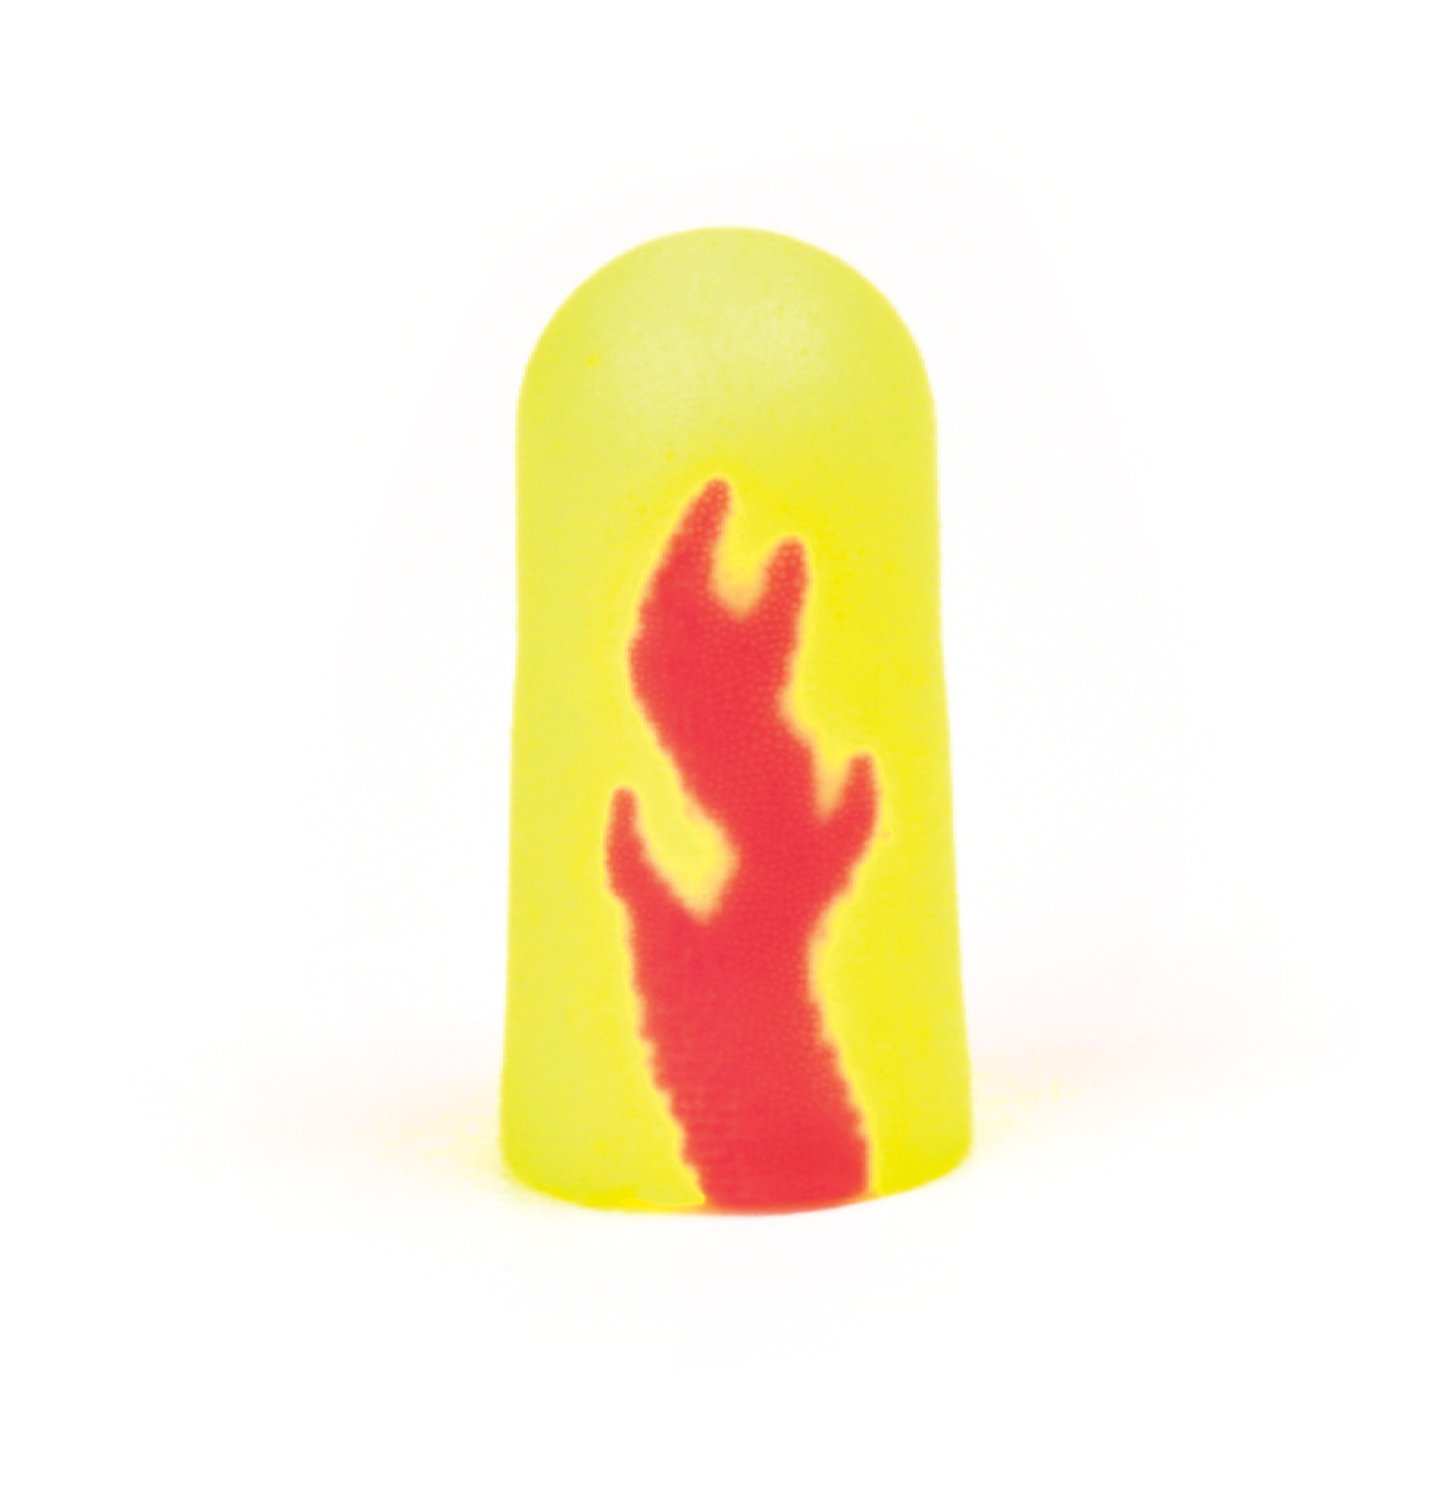 7000002304 - 3M E-A-Rsoft Yellow Neon Blasts Earplugs 312-1252, Uncorded, Poly
Bag, Regular Size, 2000 Pair/Case